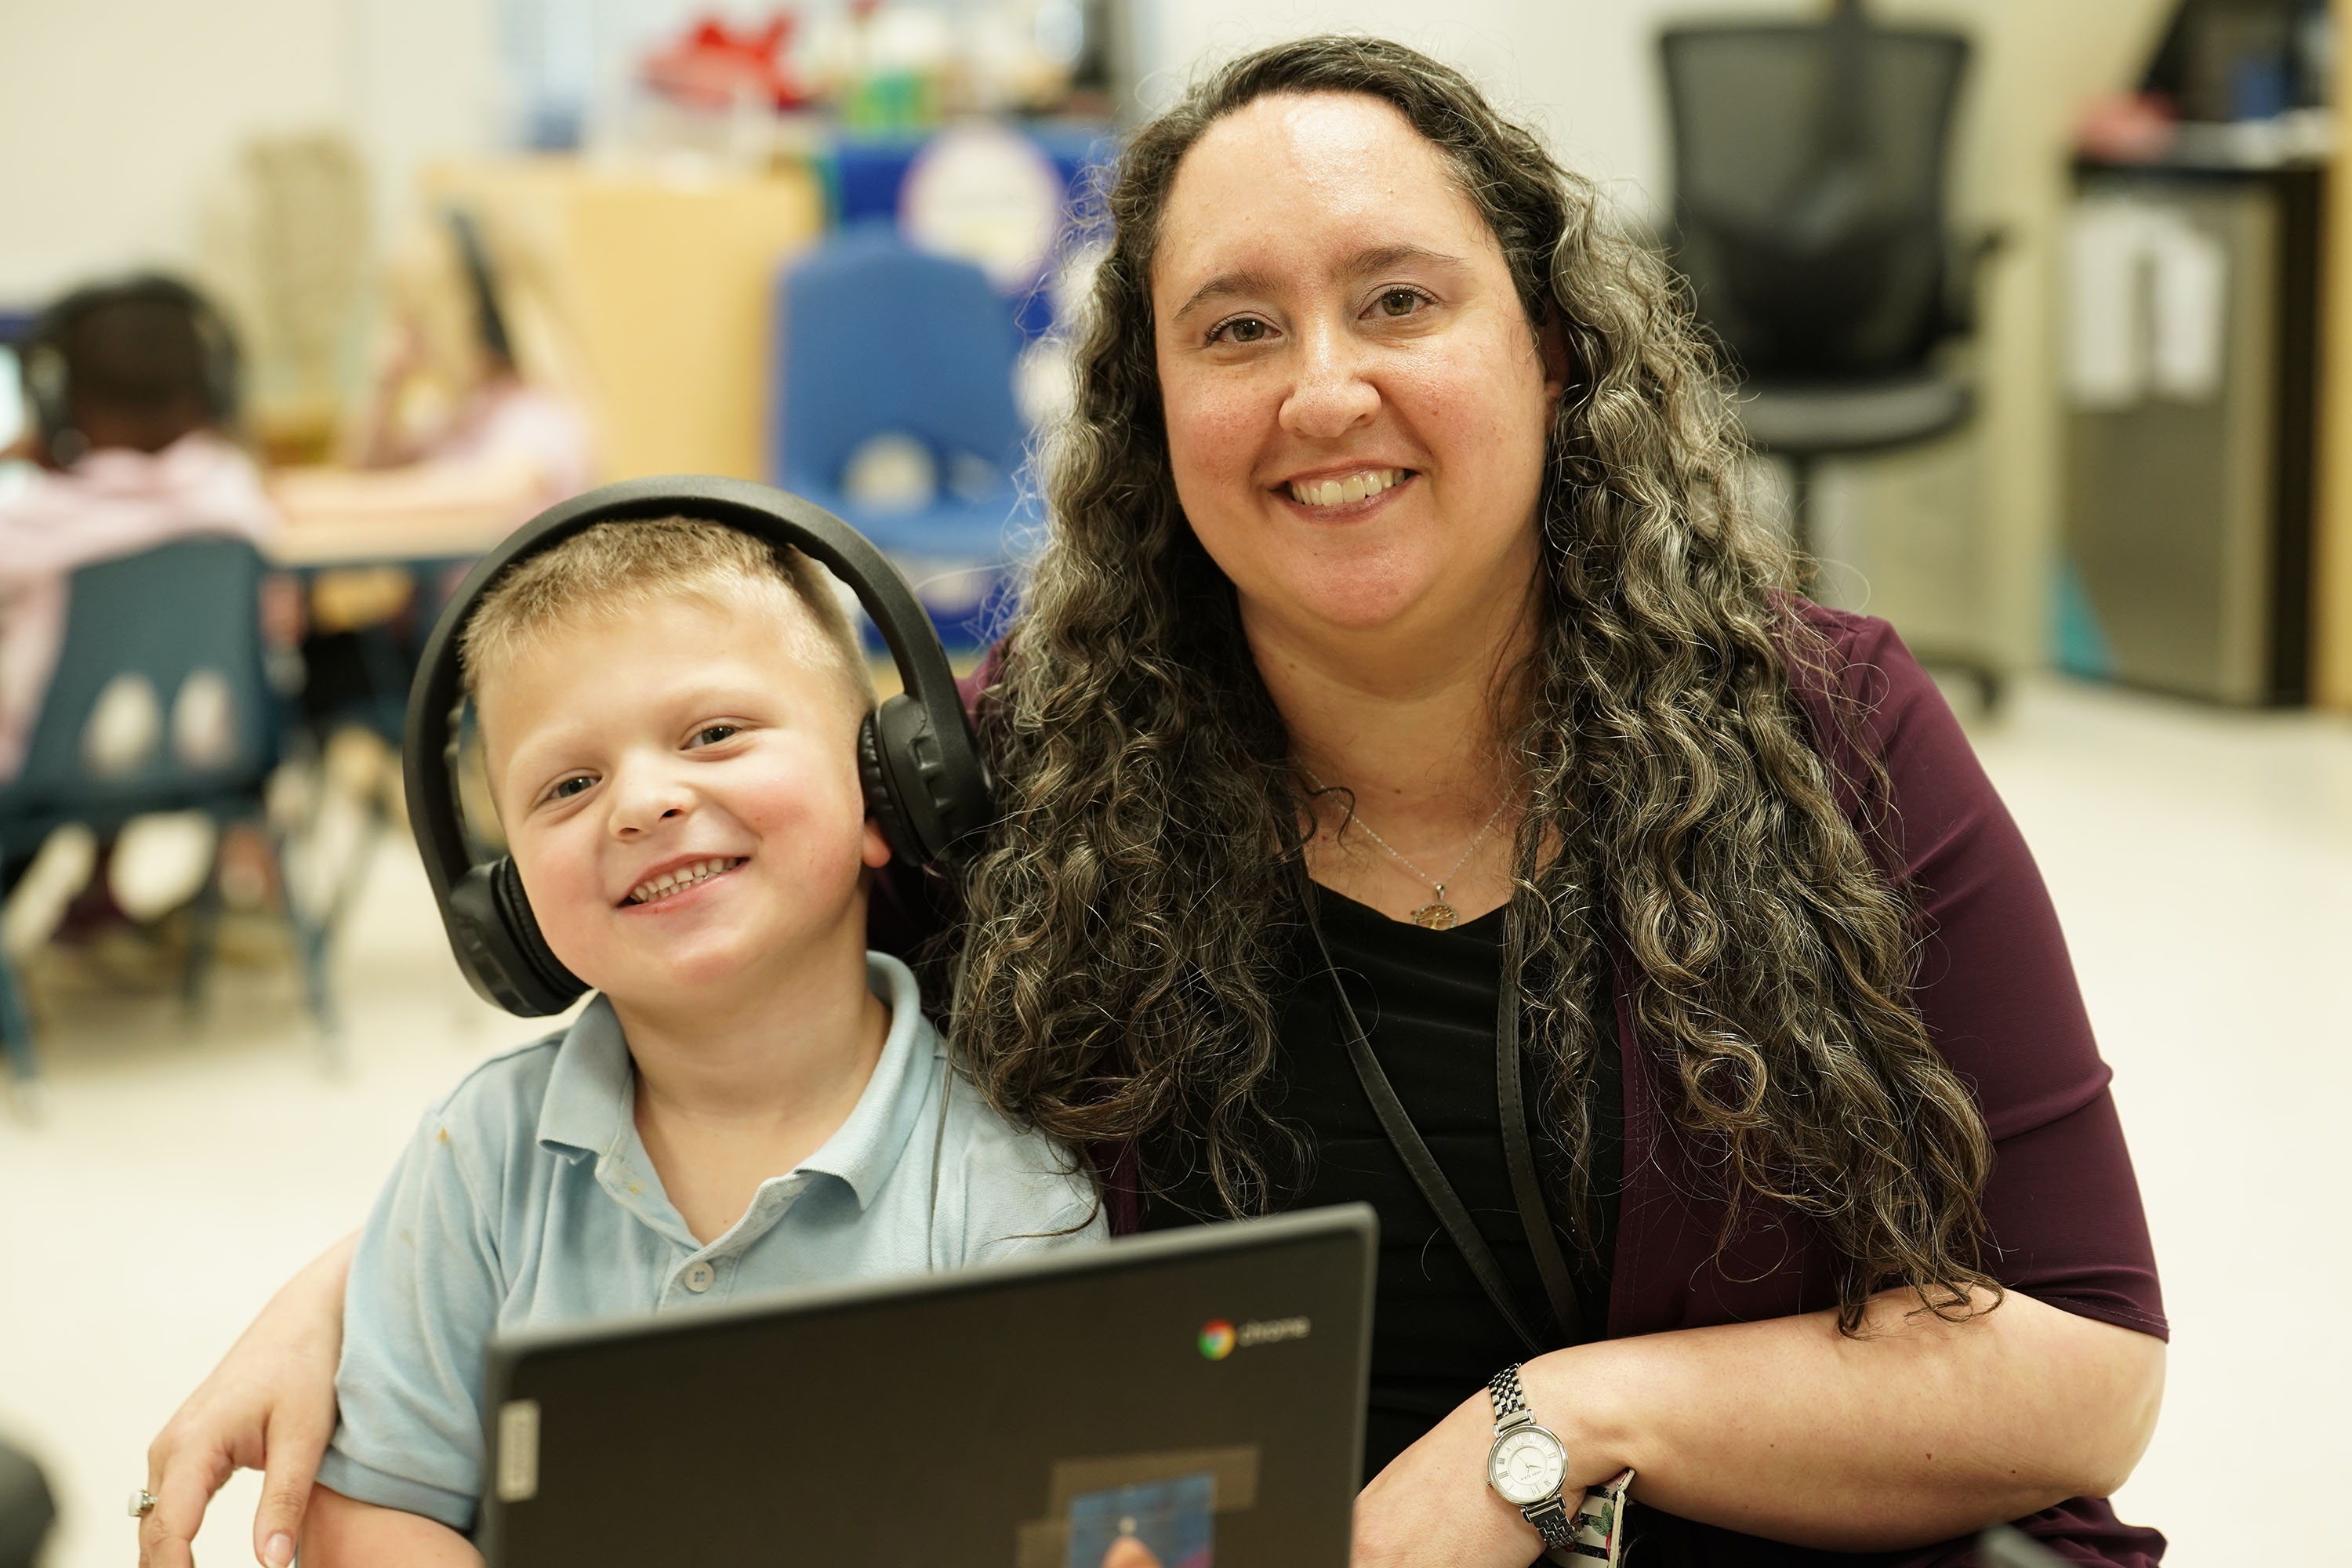 young boy wearing headphones sitting next to female with long curly hair